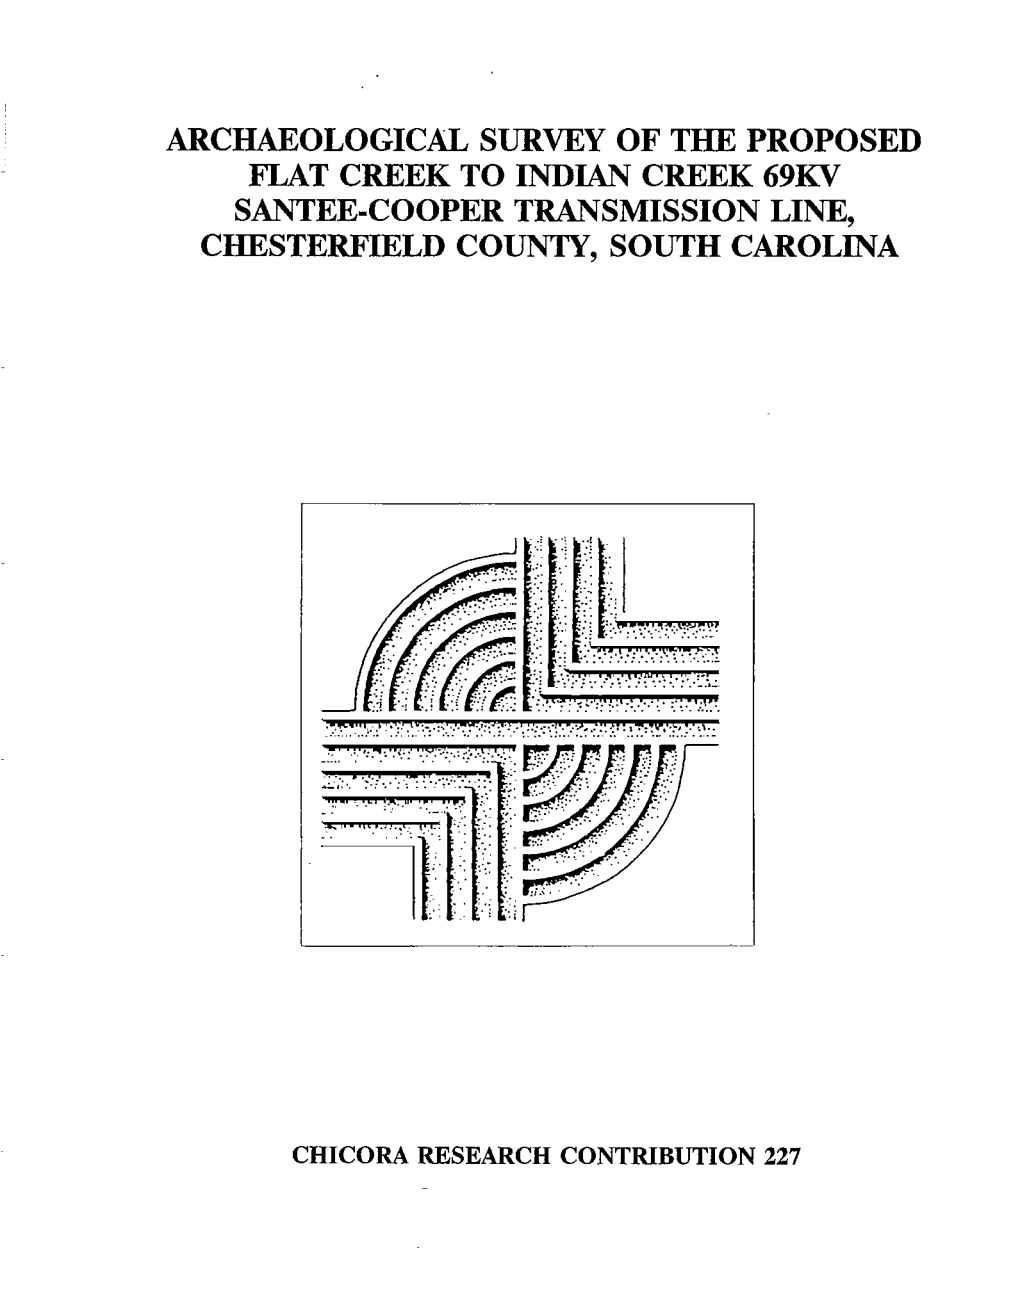 Archaeological Survey of the Proposed Flat Creek to Indian Creek 69Kv Santee-Cooper Transmission Line, Chesterfield County, South Carolina